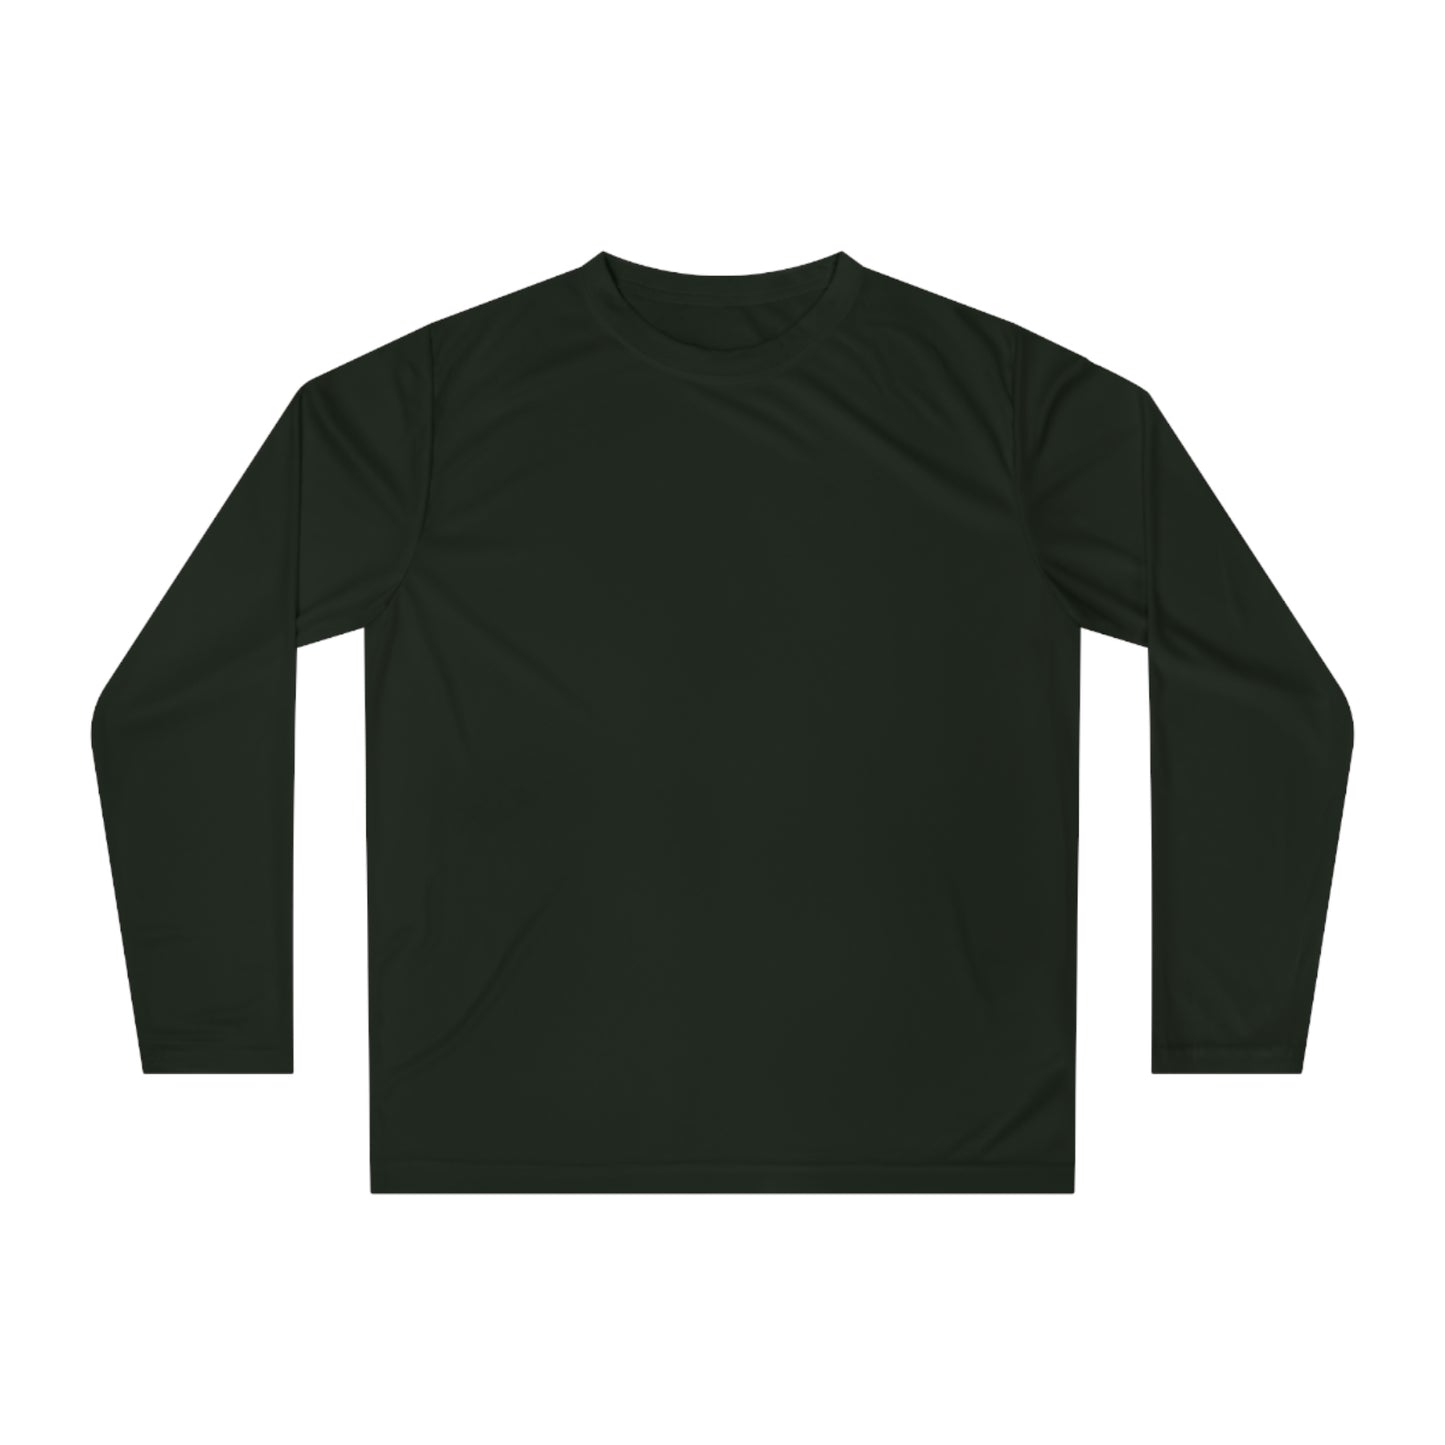 find yourself in the ADVENTURE wanderLuSt ADVENTURES Unisex DRIFIT Performance Long Sleeve Shirt